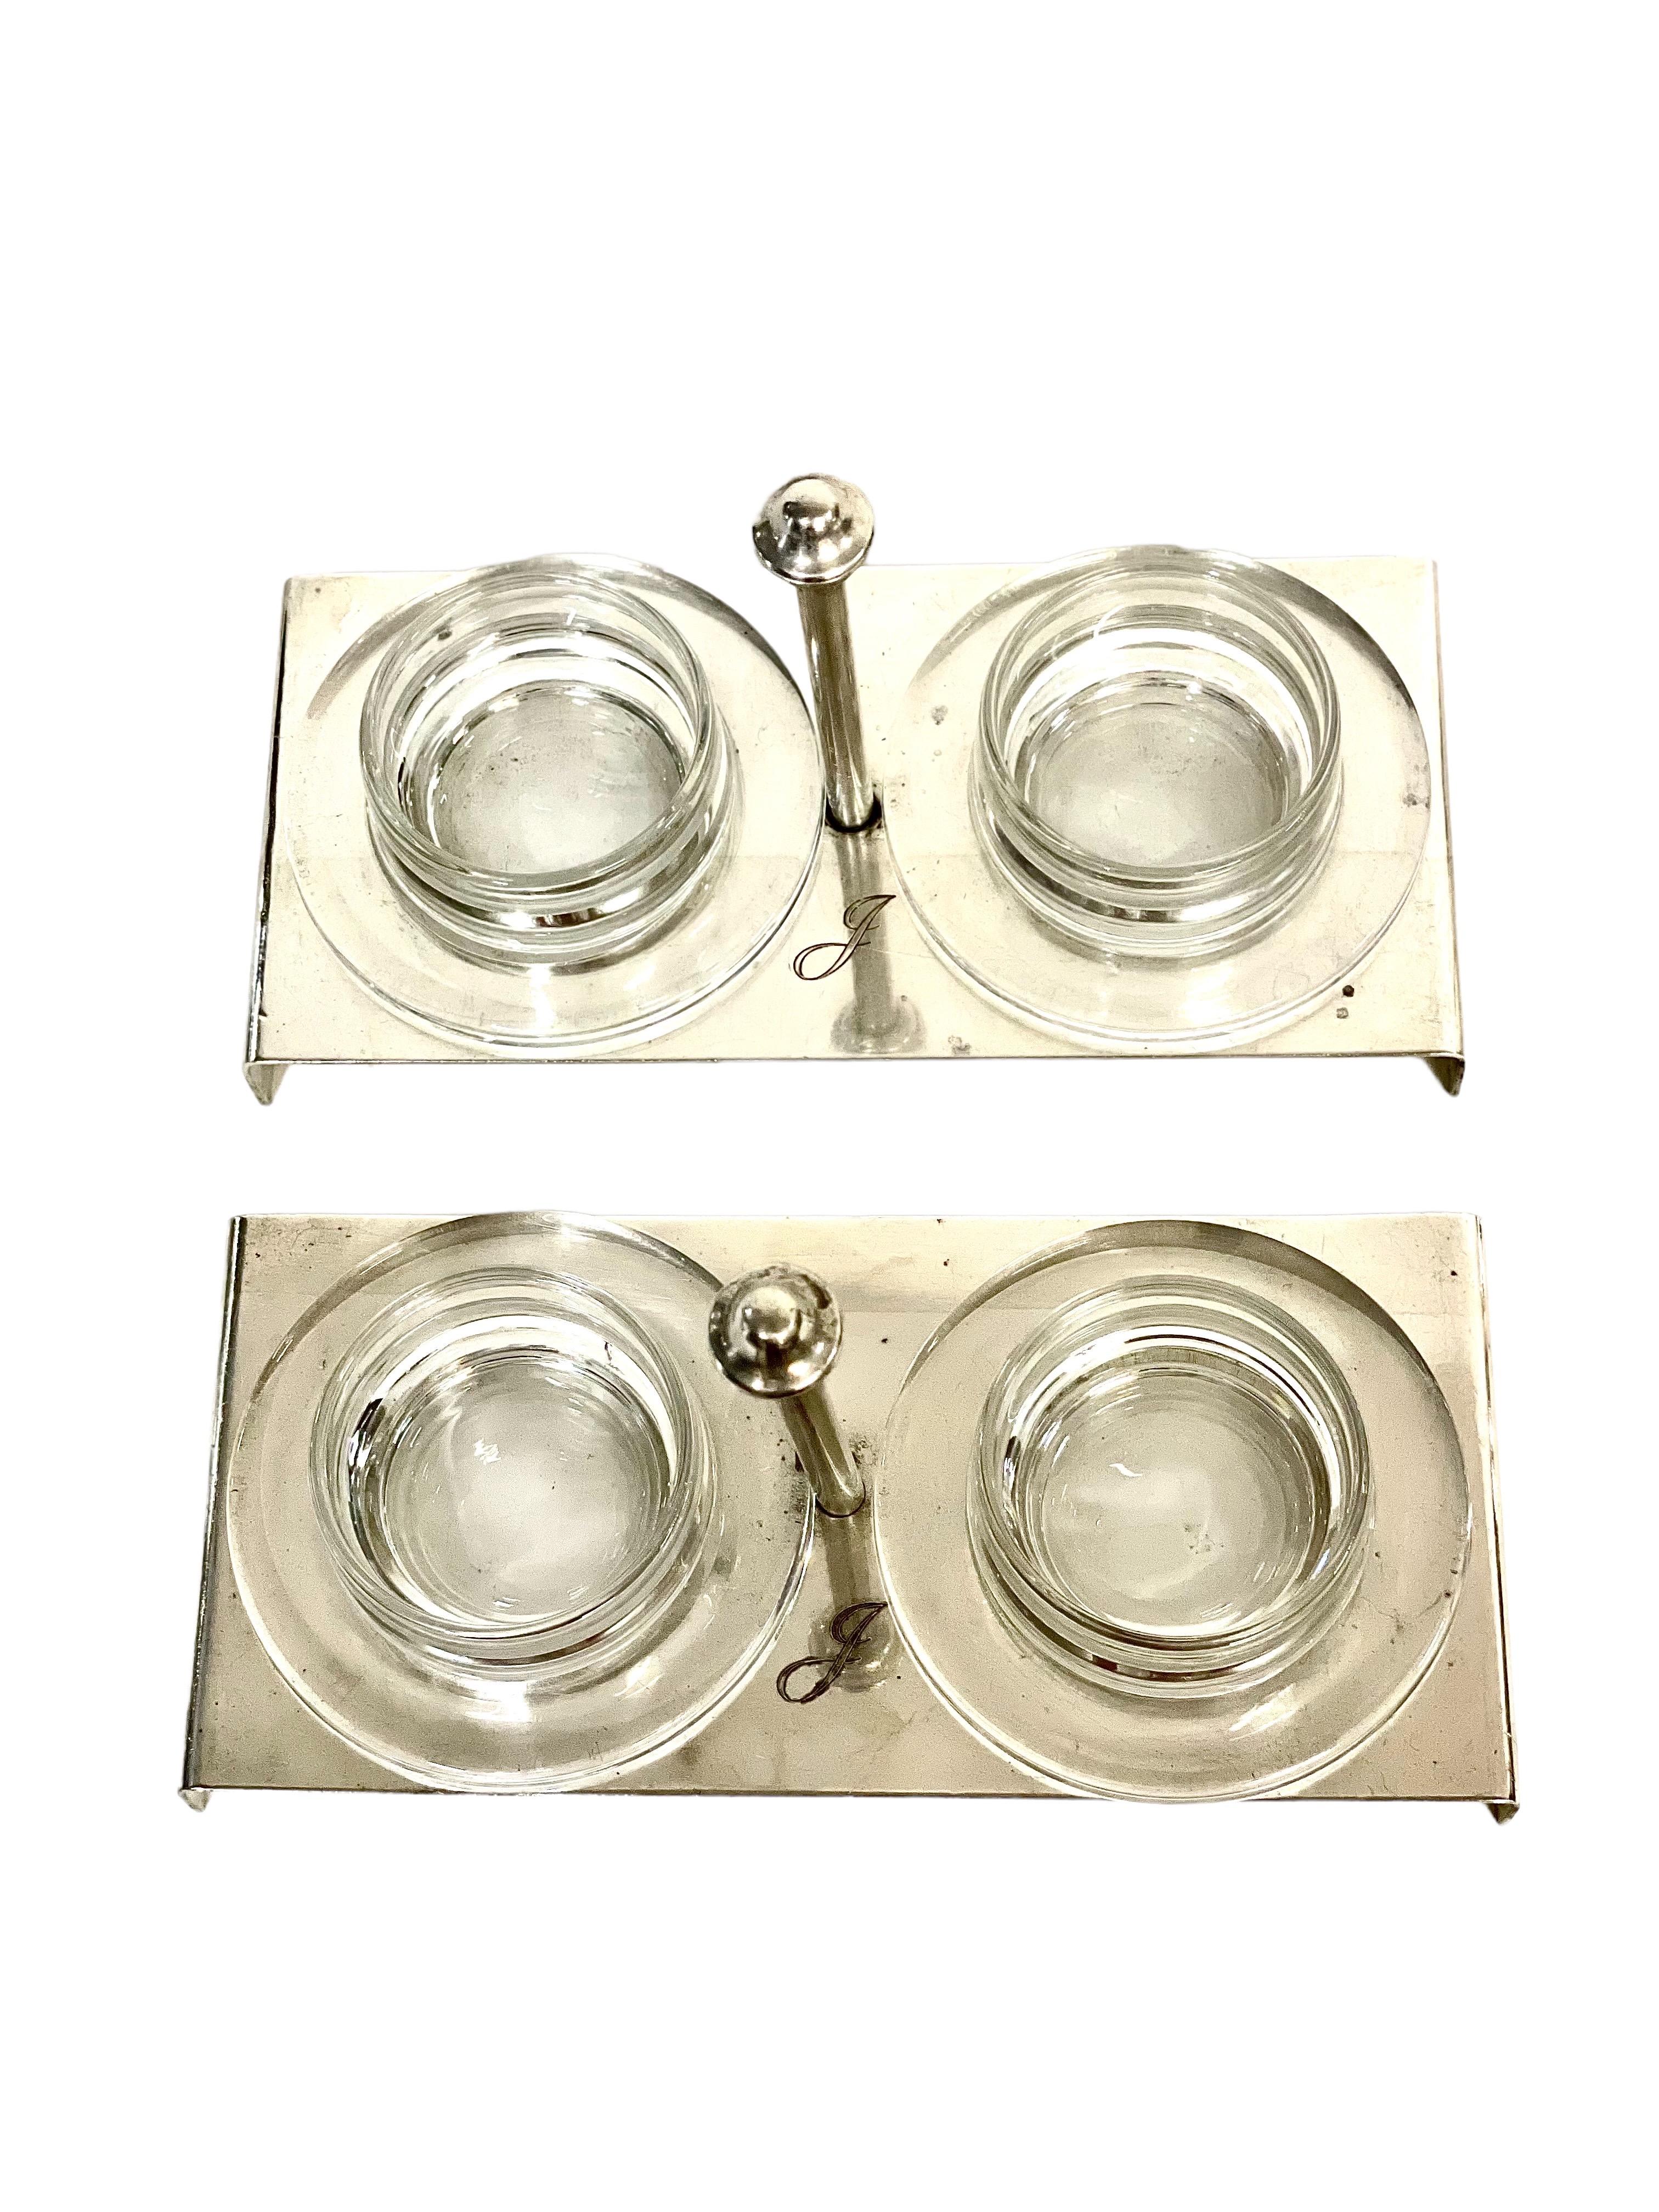 A rather stylish 1950s double butter dome, its silver-plated cloches mounted on a raised rectangular base, with central carrying handle. Each dome lifts off to reveal a (modern) glass dish, which makes the service extremely easy to clean. The set is